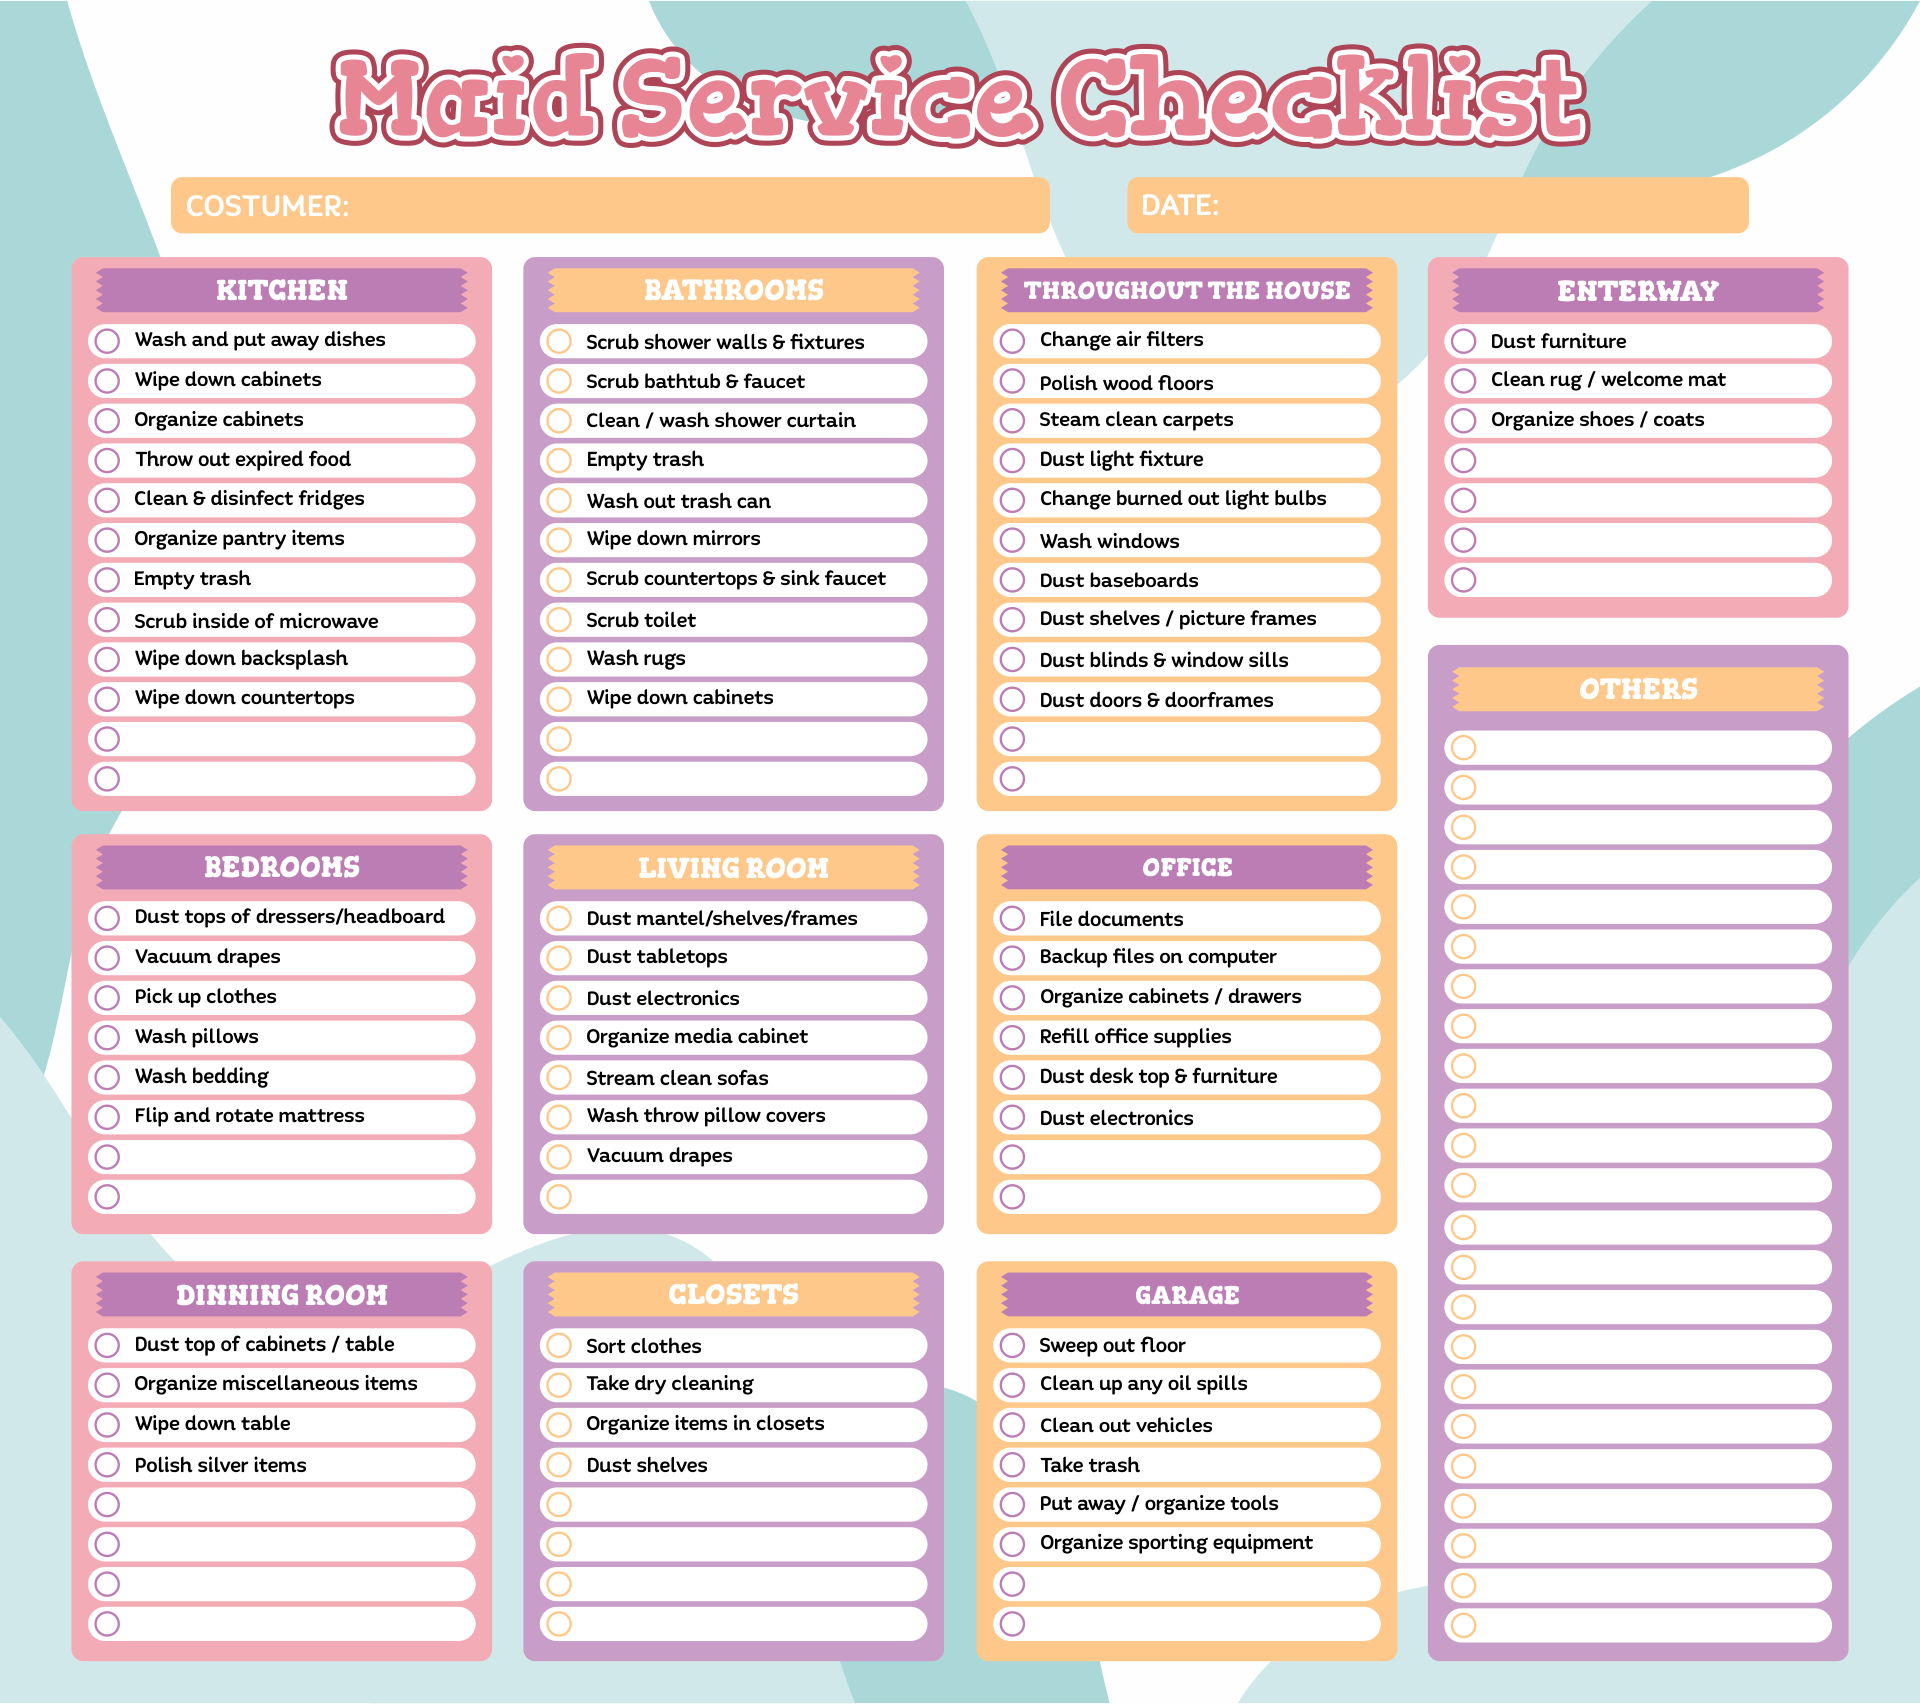 9-best-images-of-maid-service-checklist-printable-house-cleaning-service-checklist